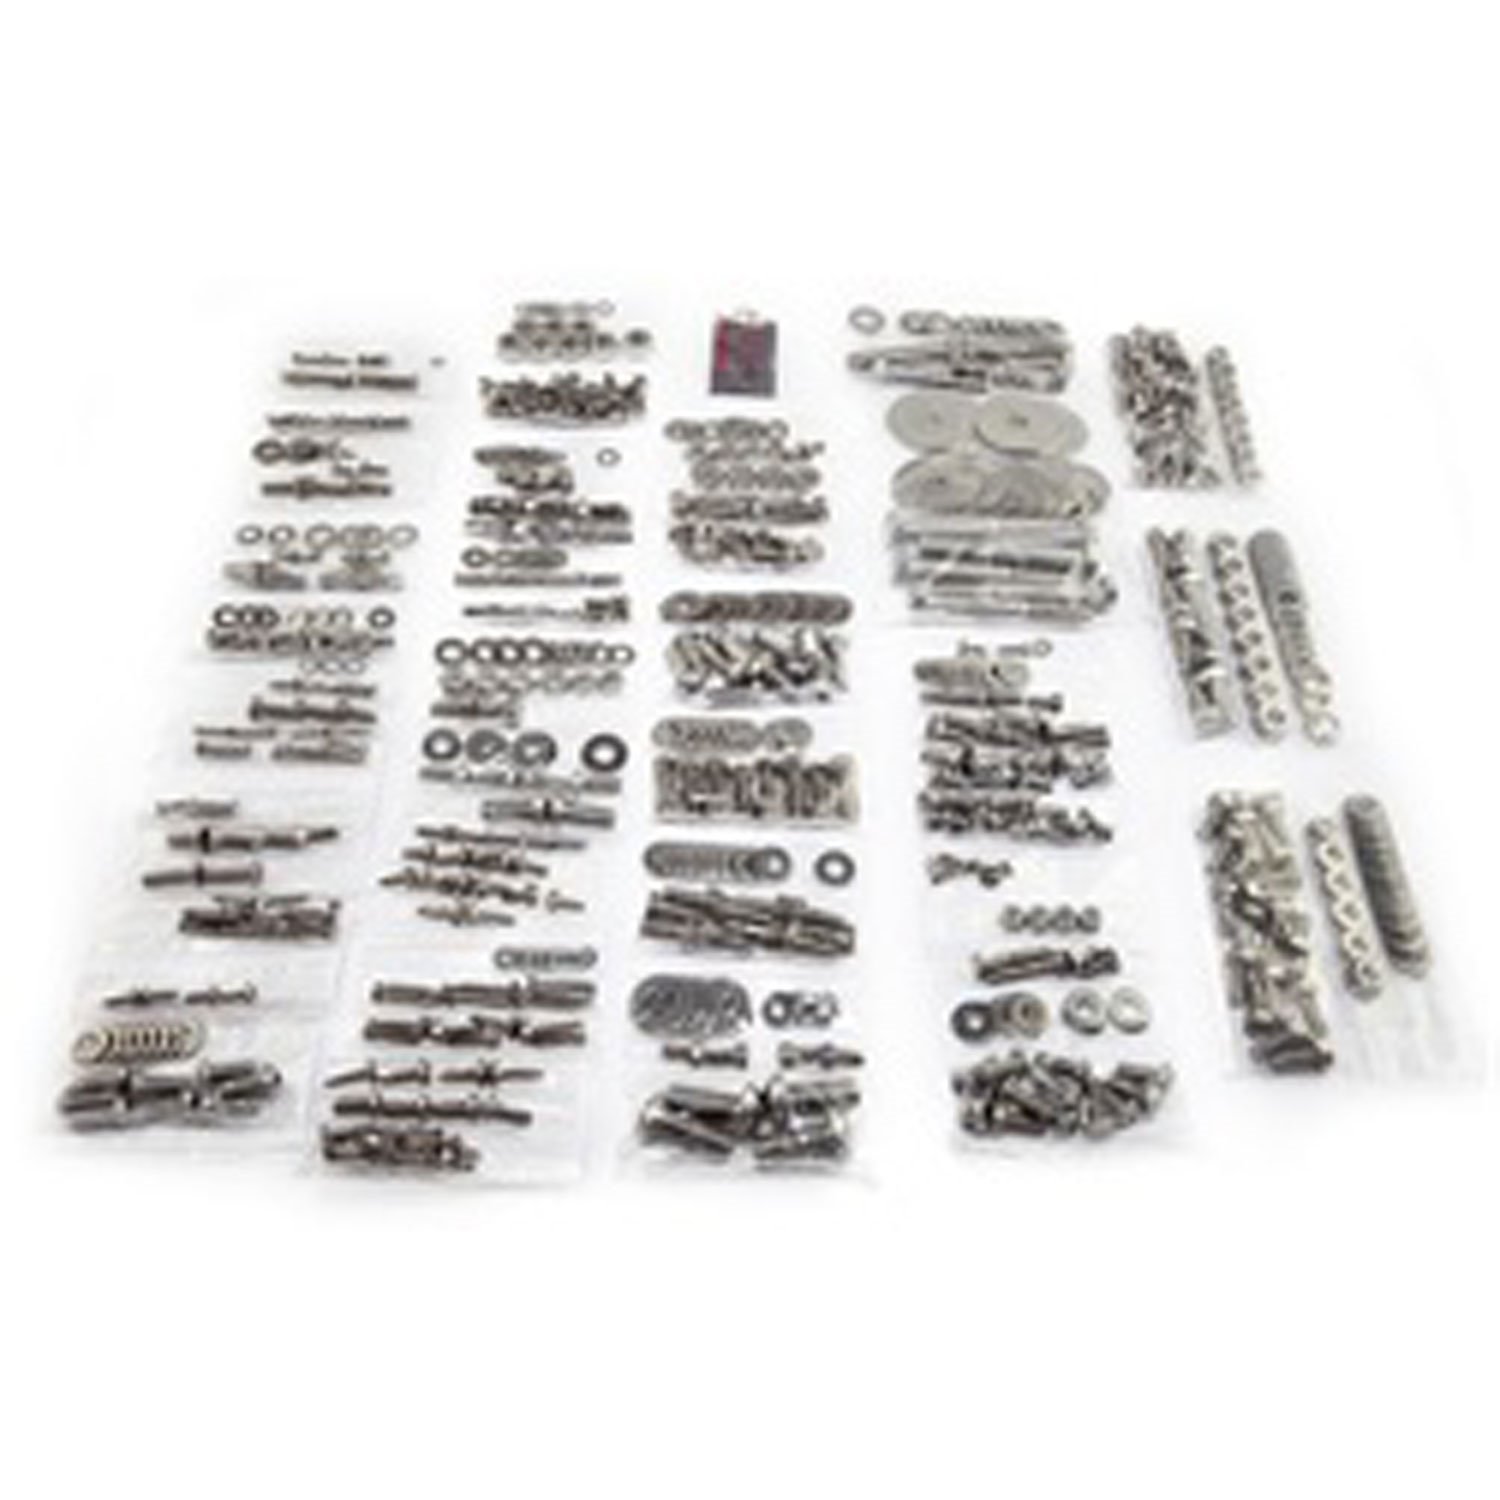 This 703 piece stainless steel body fastener kit from Omix-ADA gives you all the fasteners to rebuil